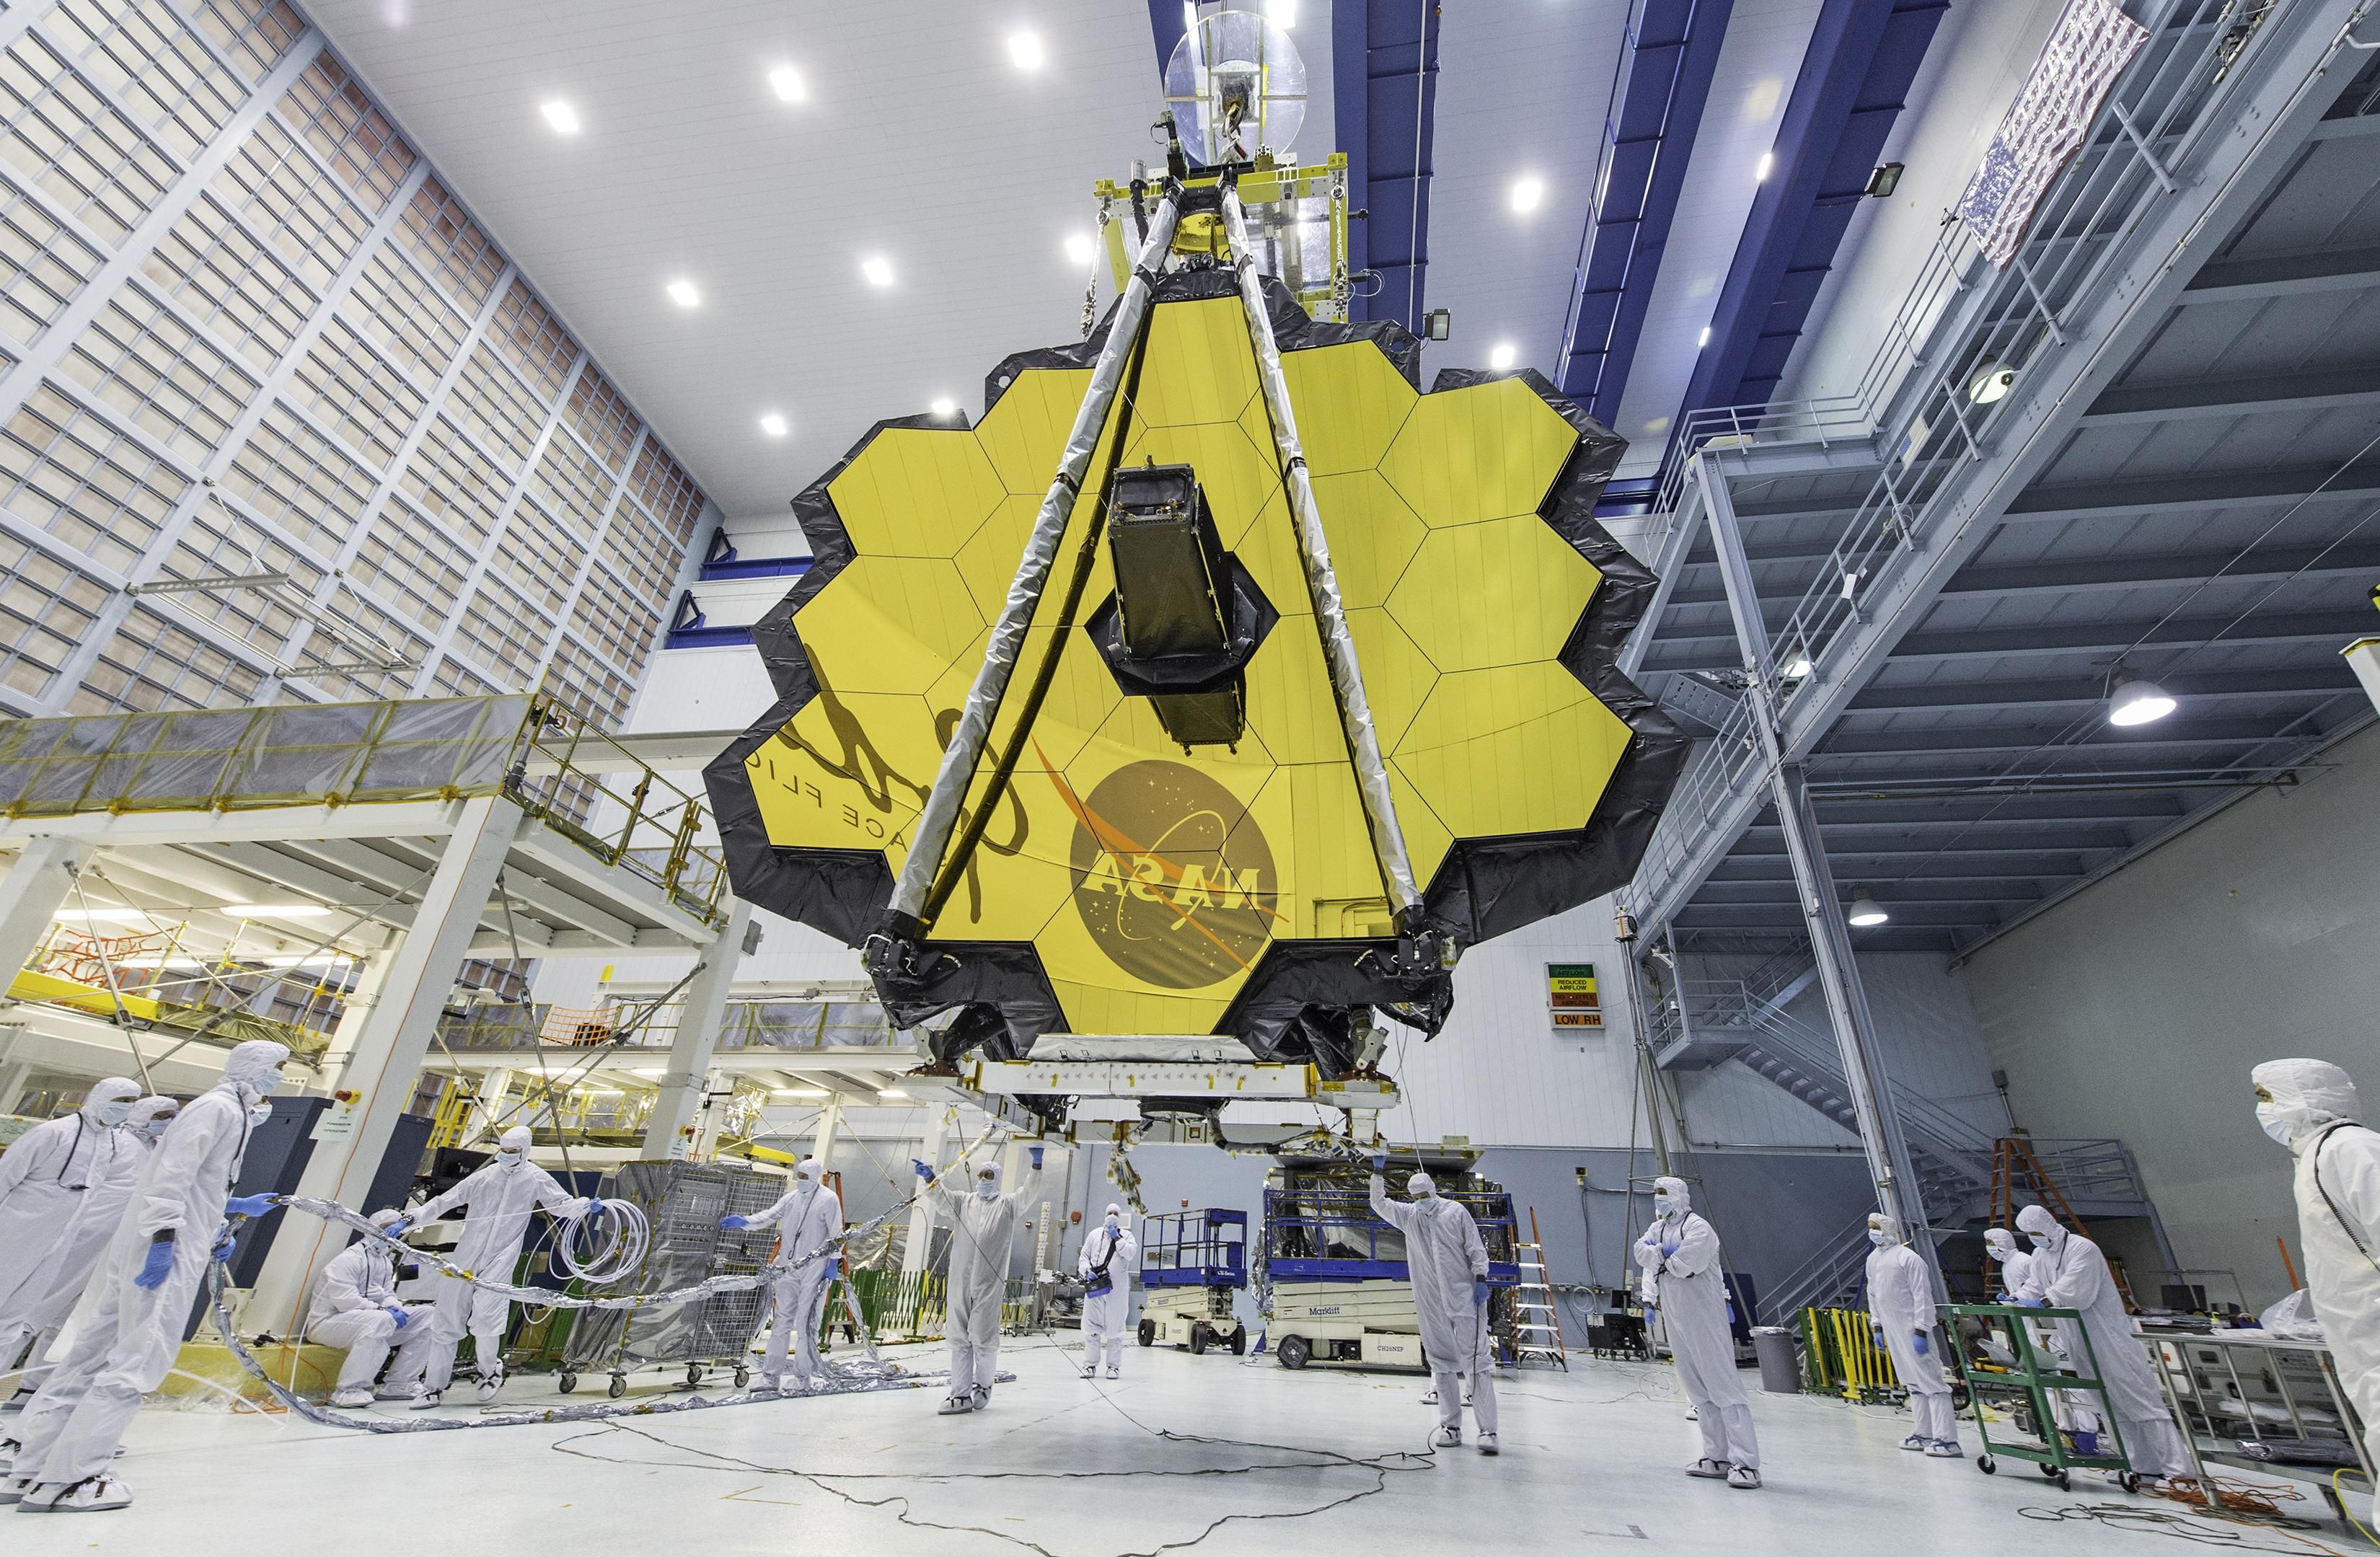 Fourteen technicians in clean-room suits guide the hoisting of a honeycombed, hexagon-mirrored telescope inside a giant cleanroom construction space 